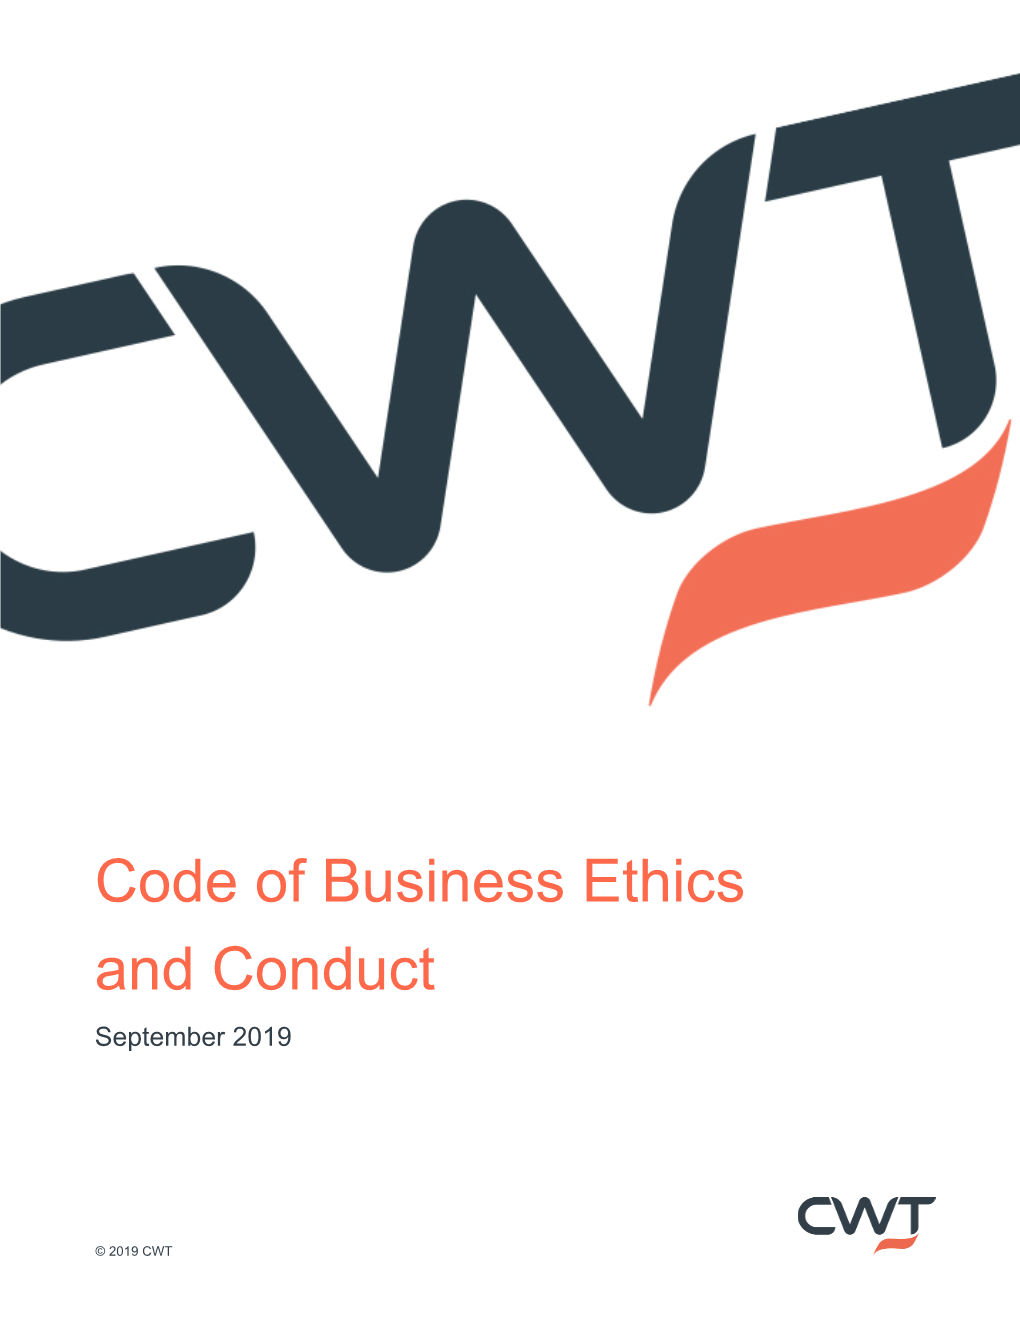 Code of Business Ethics and Conduct (‘The Code’) Is Just That – a Marker by Which We and Our Work Can Be Judged Publicly